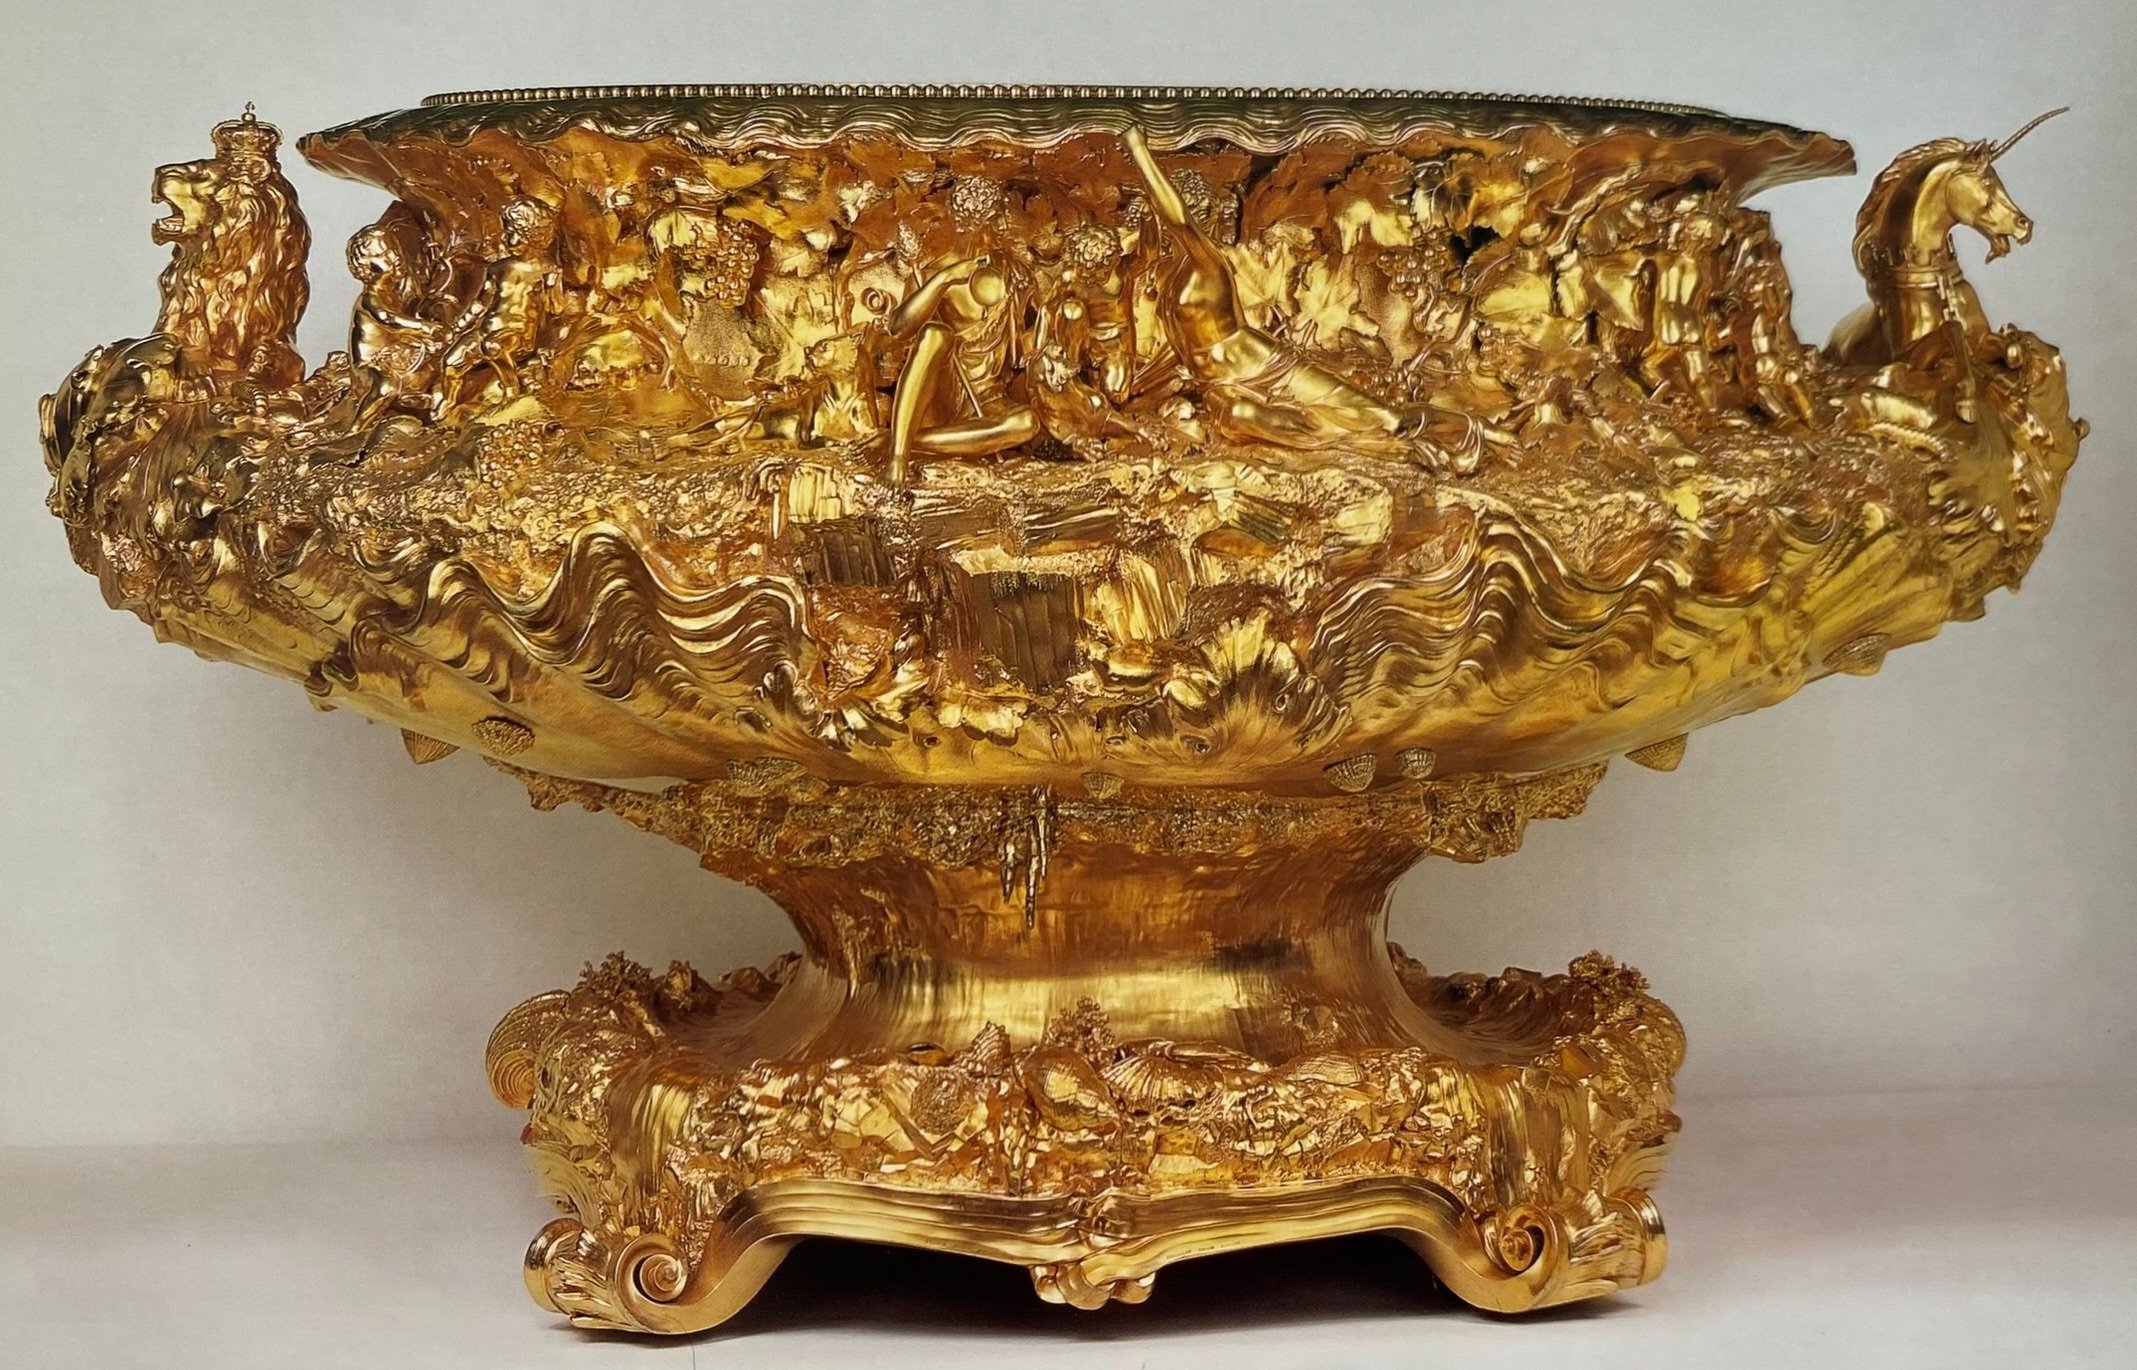 The Grand Punch Bowl’ – possibly the largest and heaviest piece of silver dining ware in the world